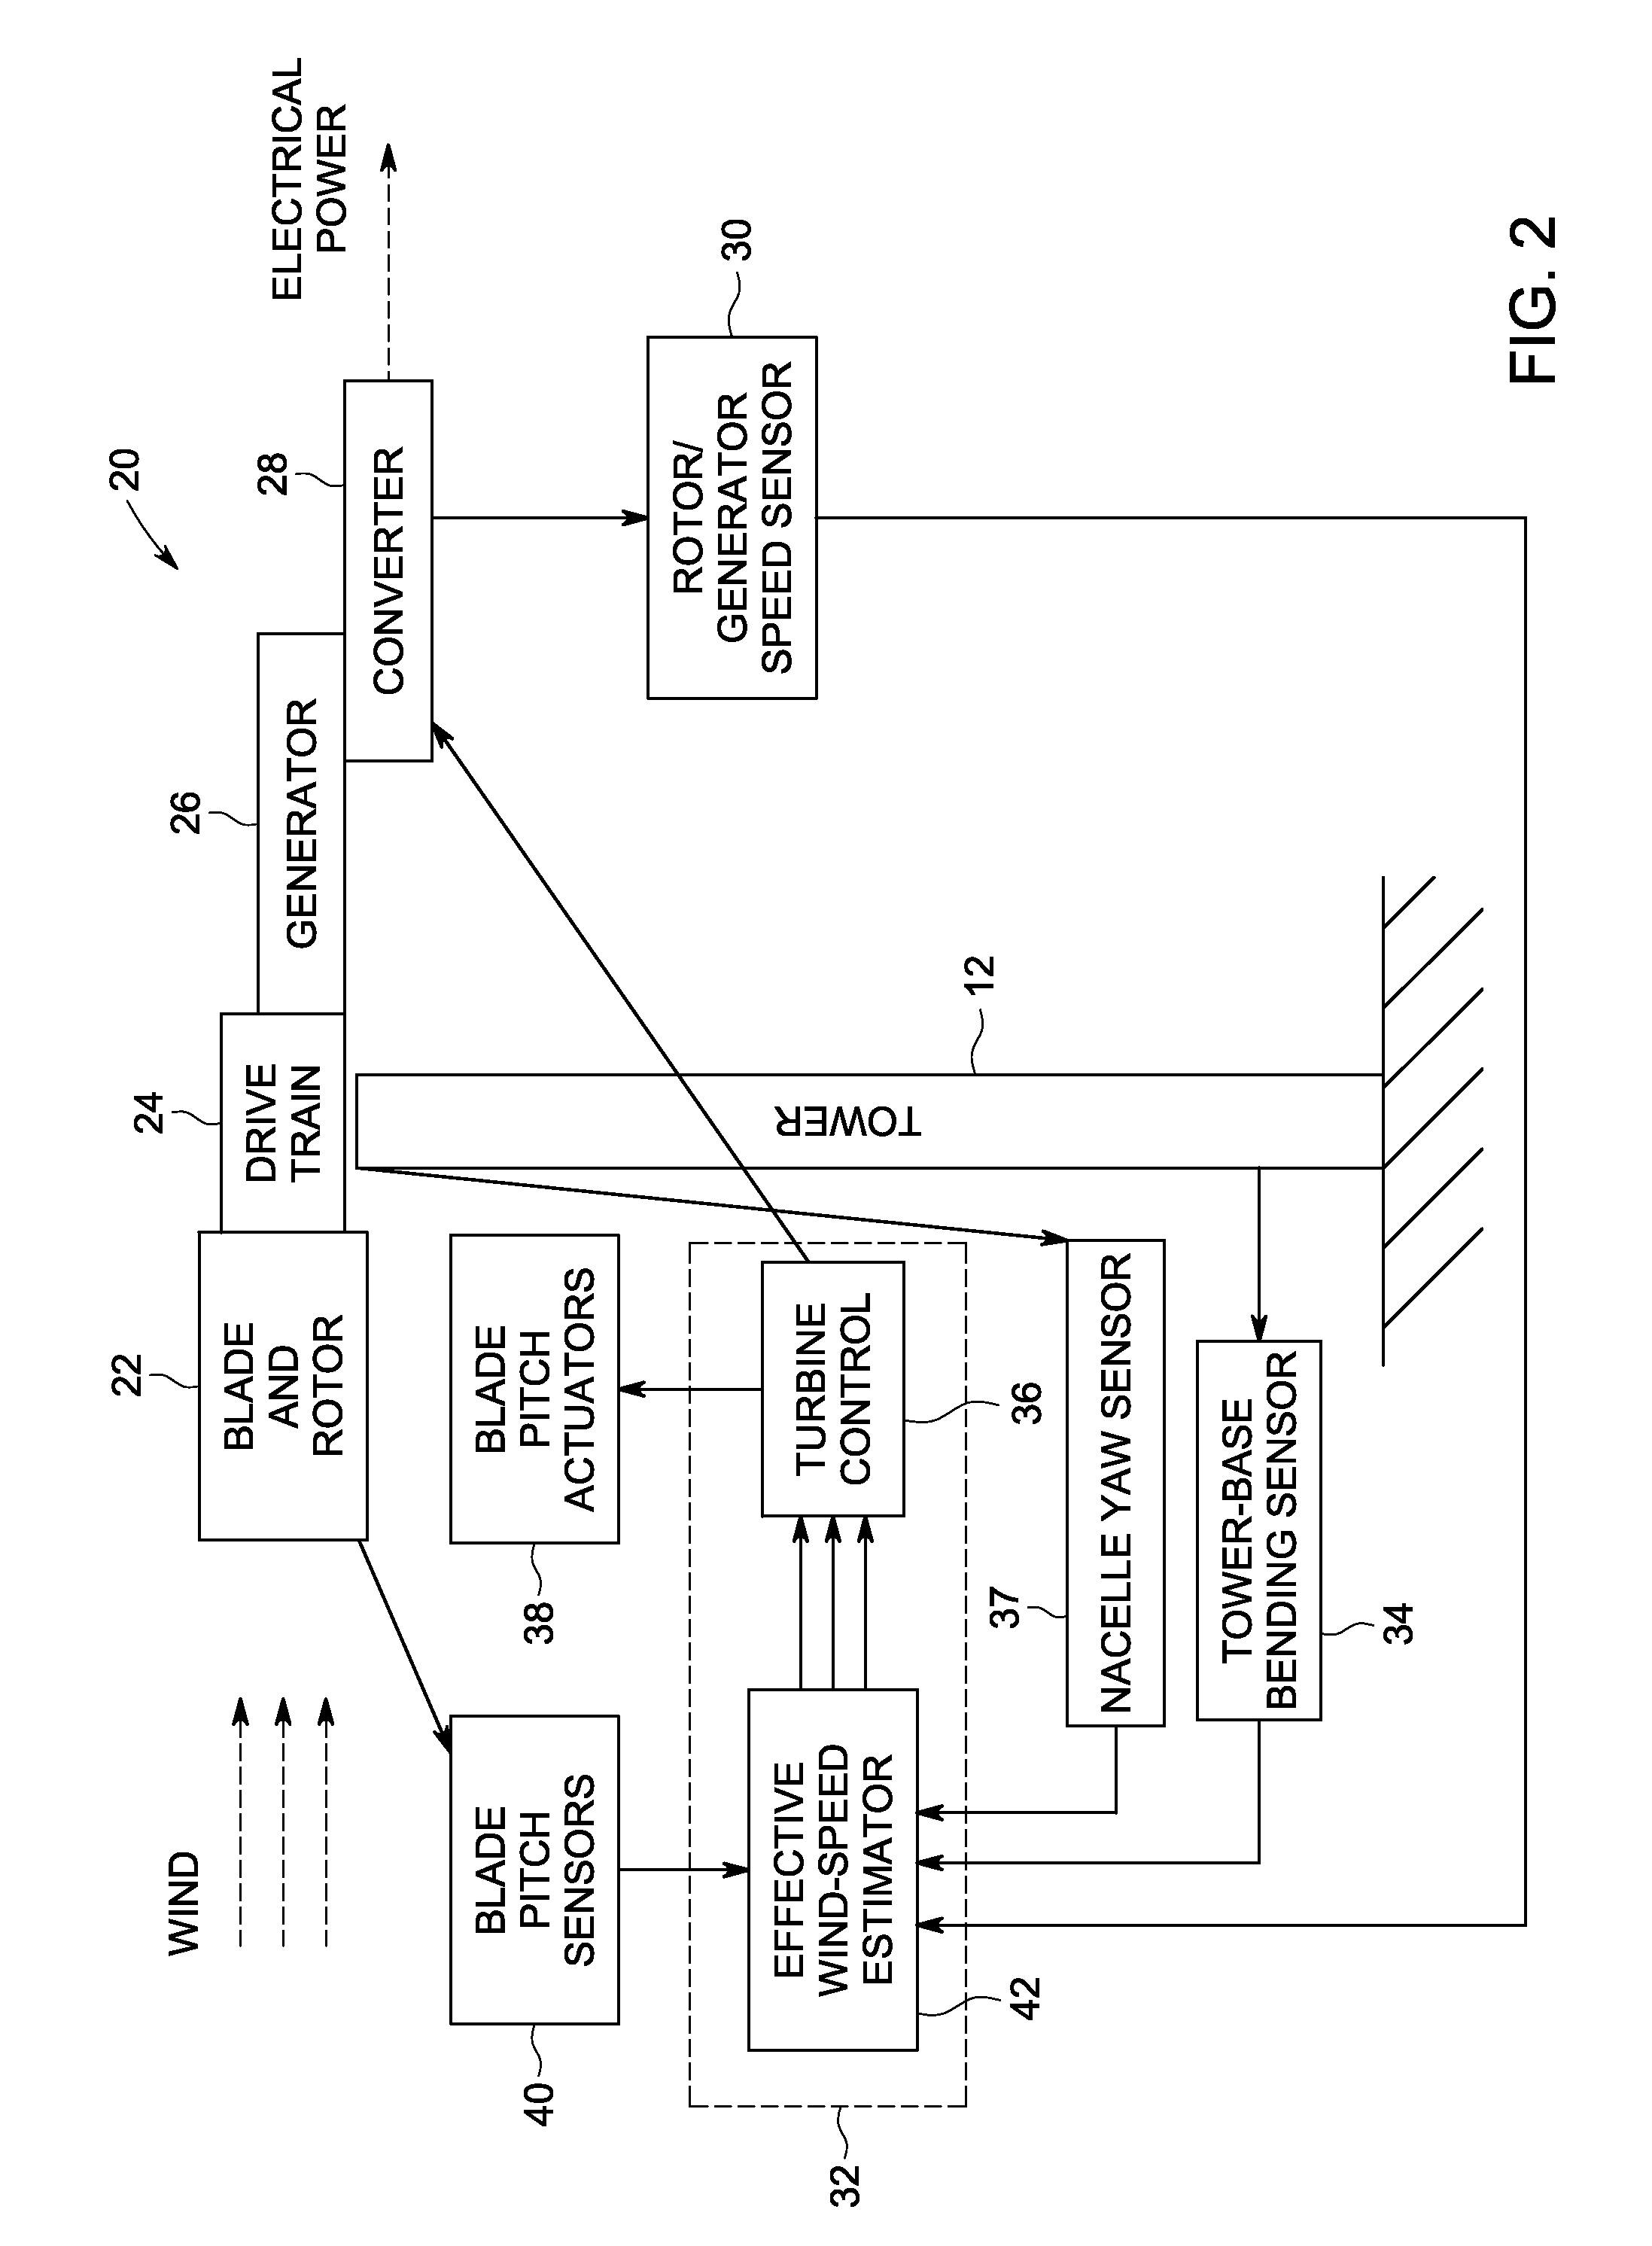 System and method for controlling wind turbine actuation